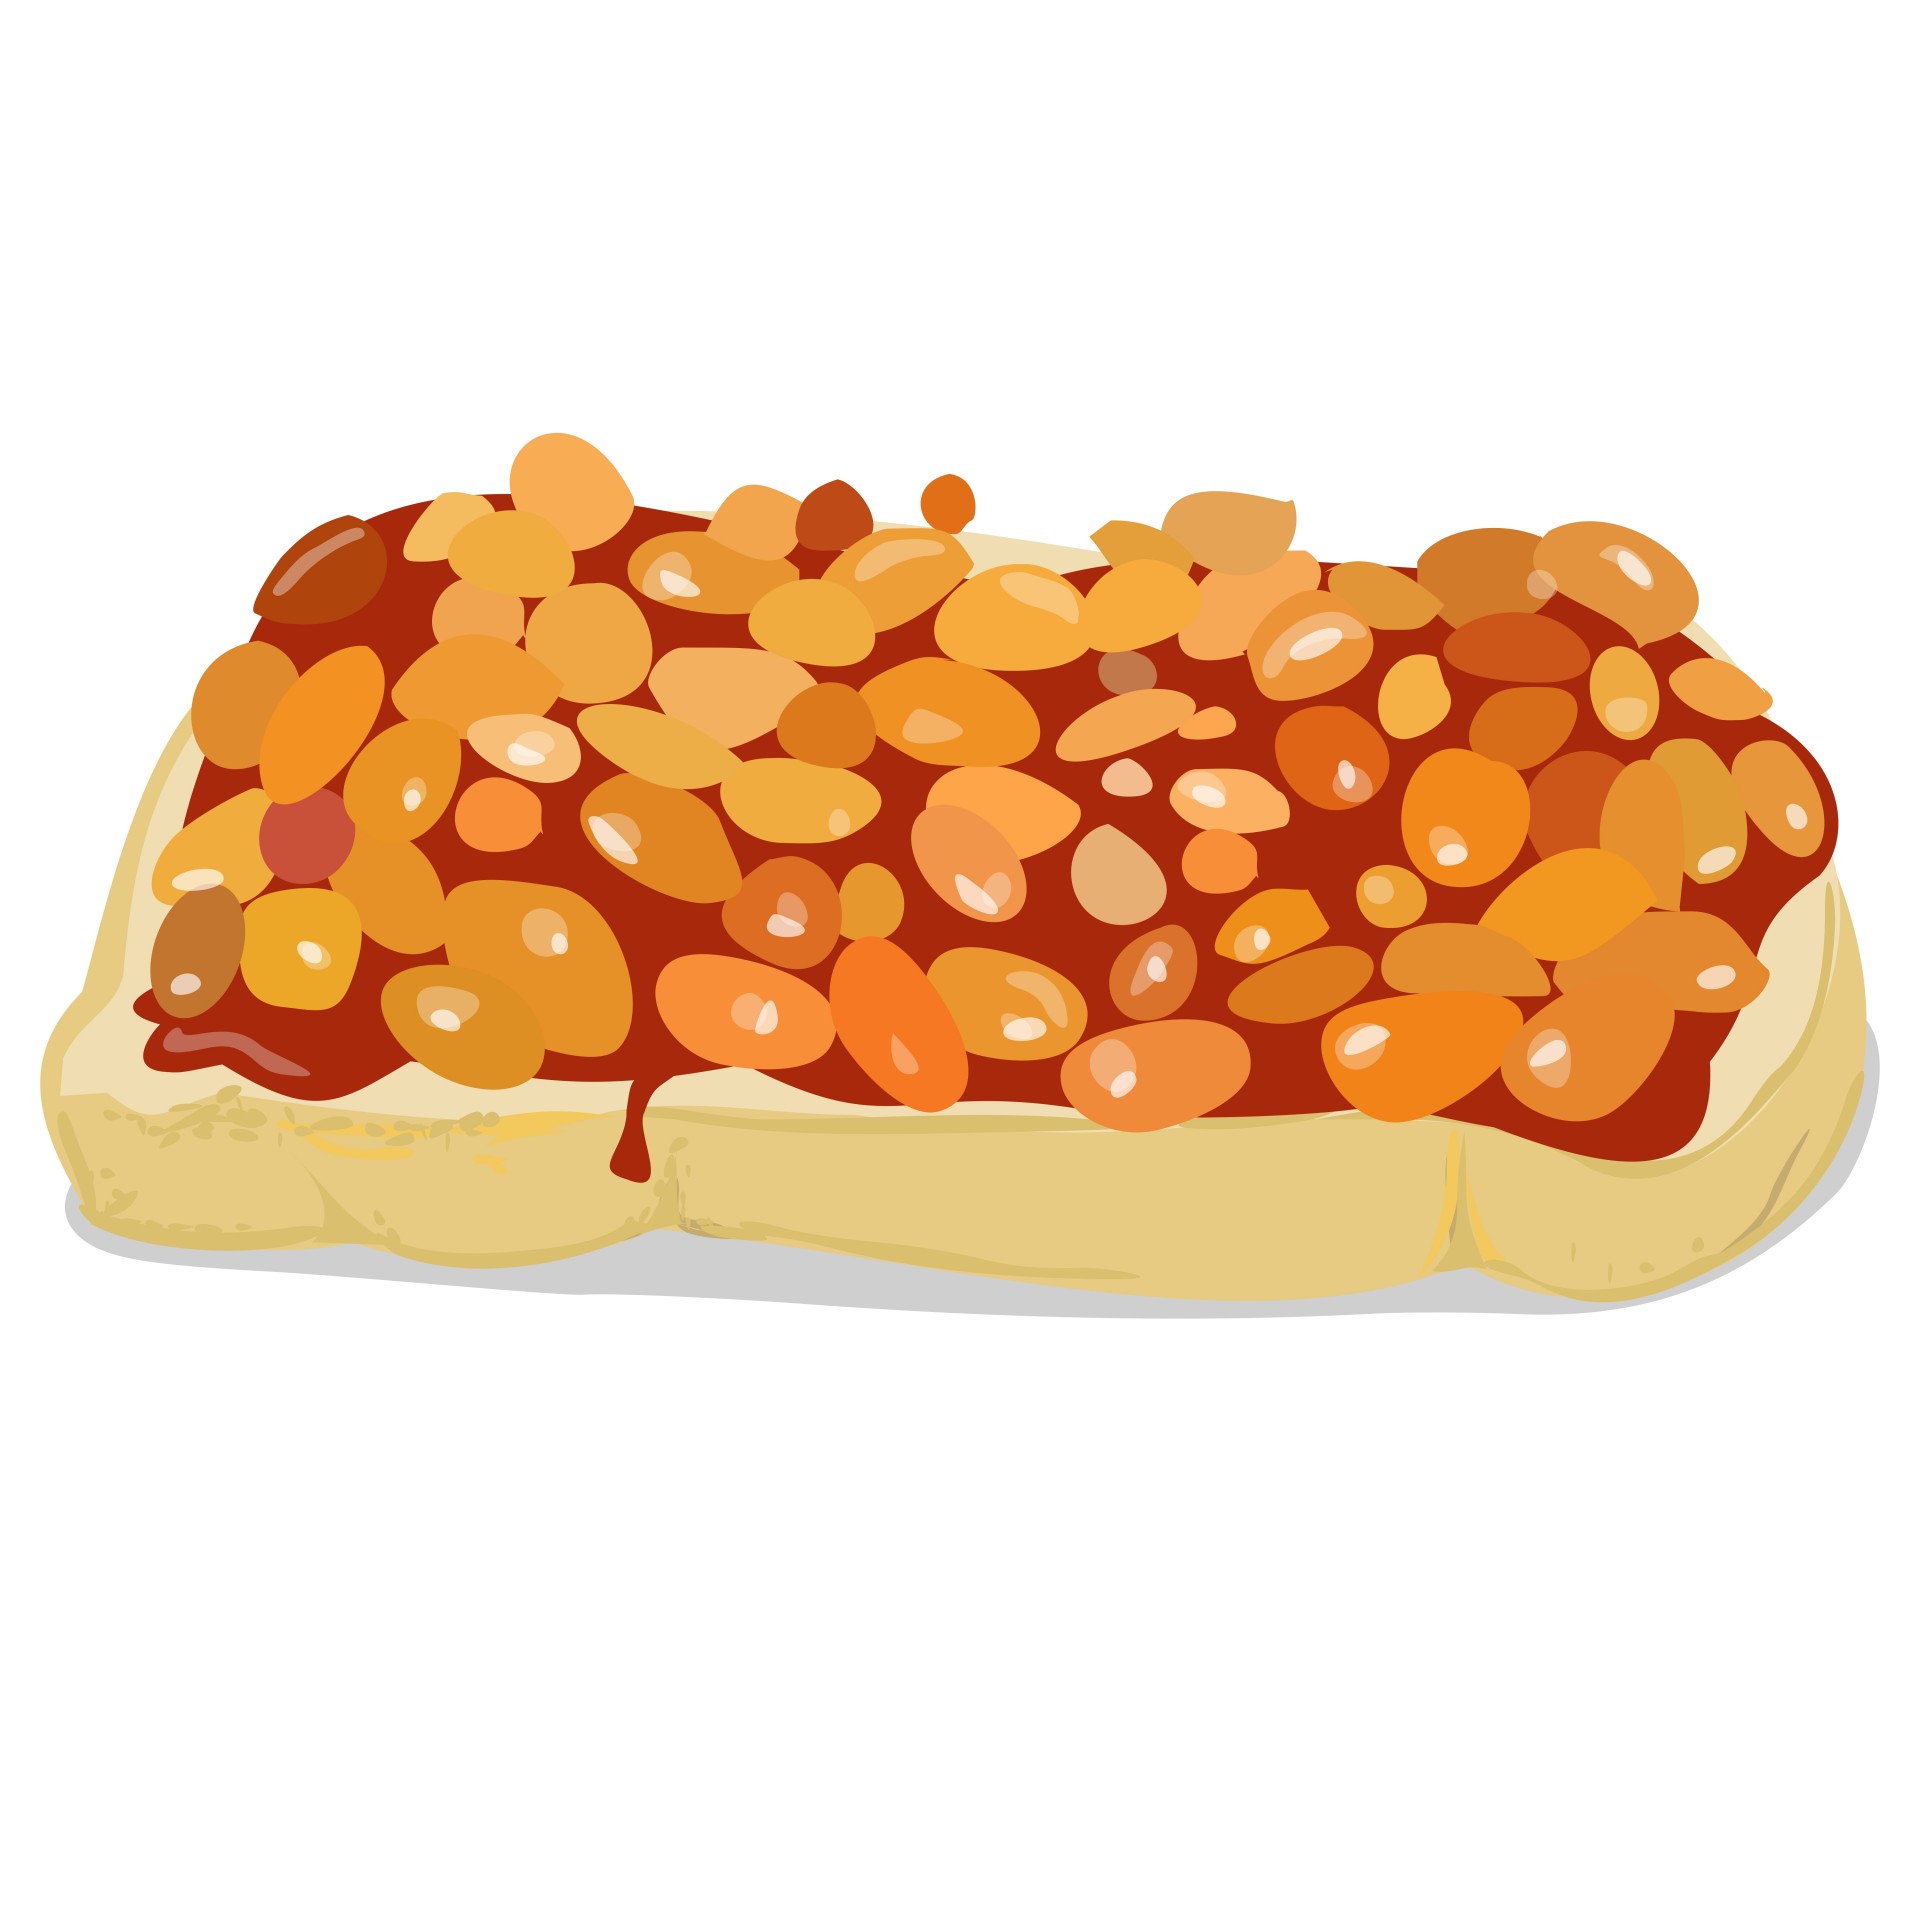 Baked Beans on Toast Au Fromage